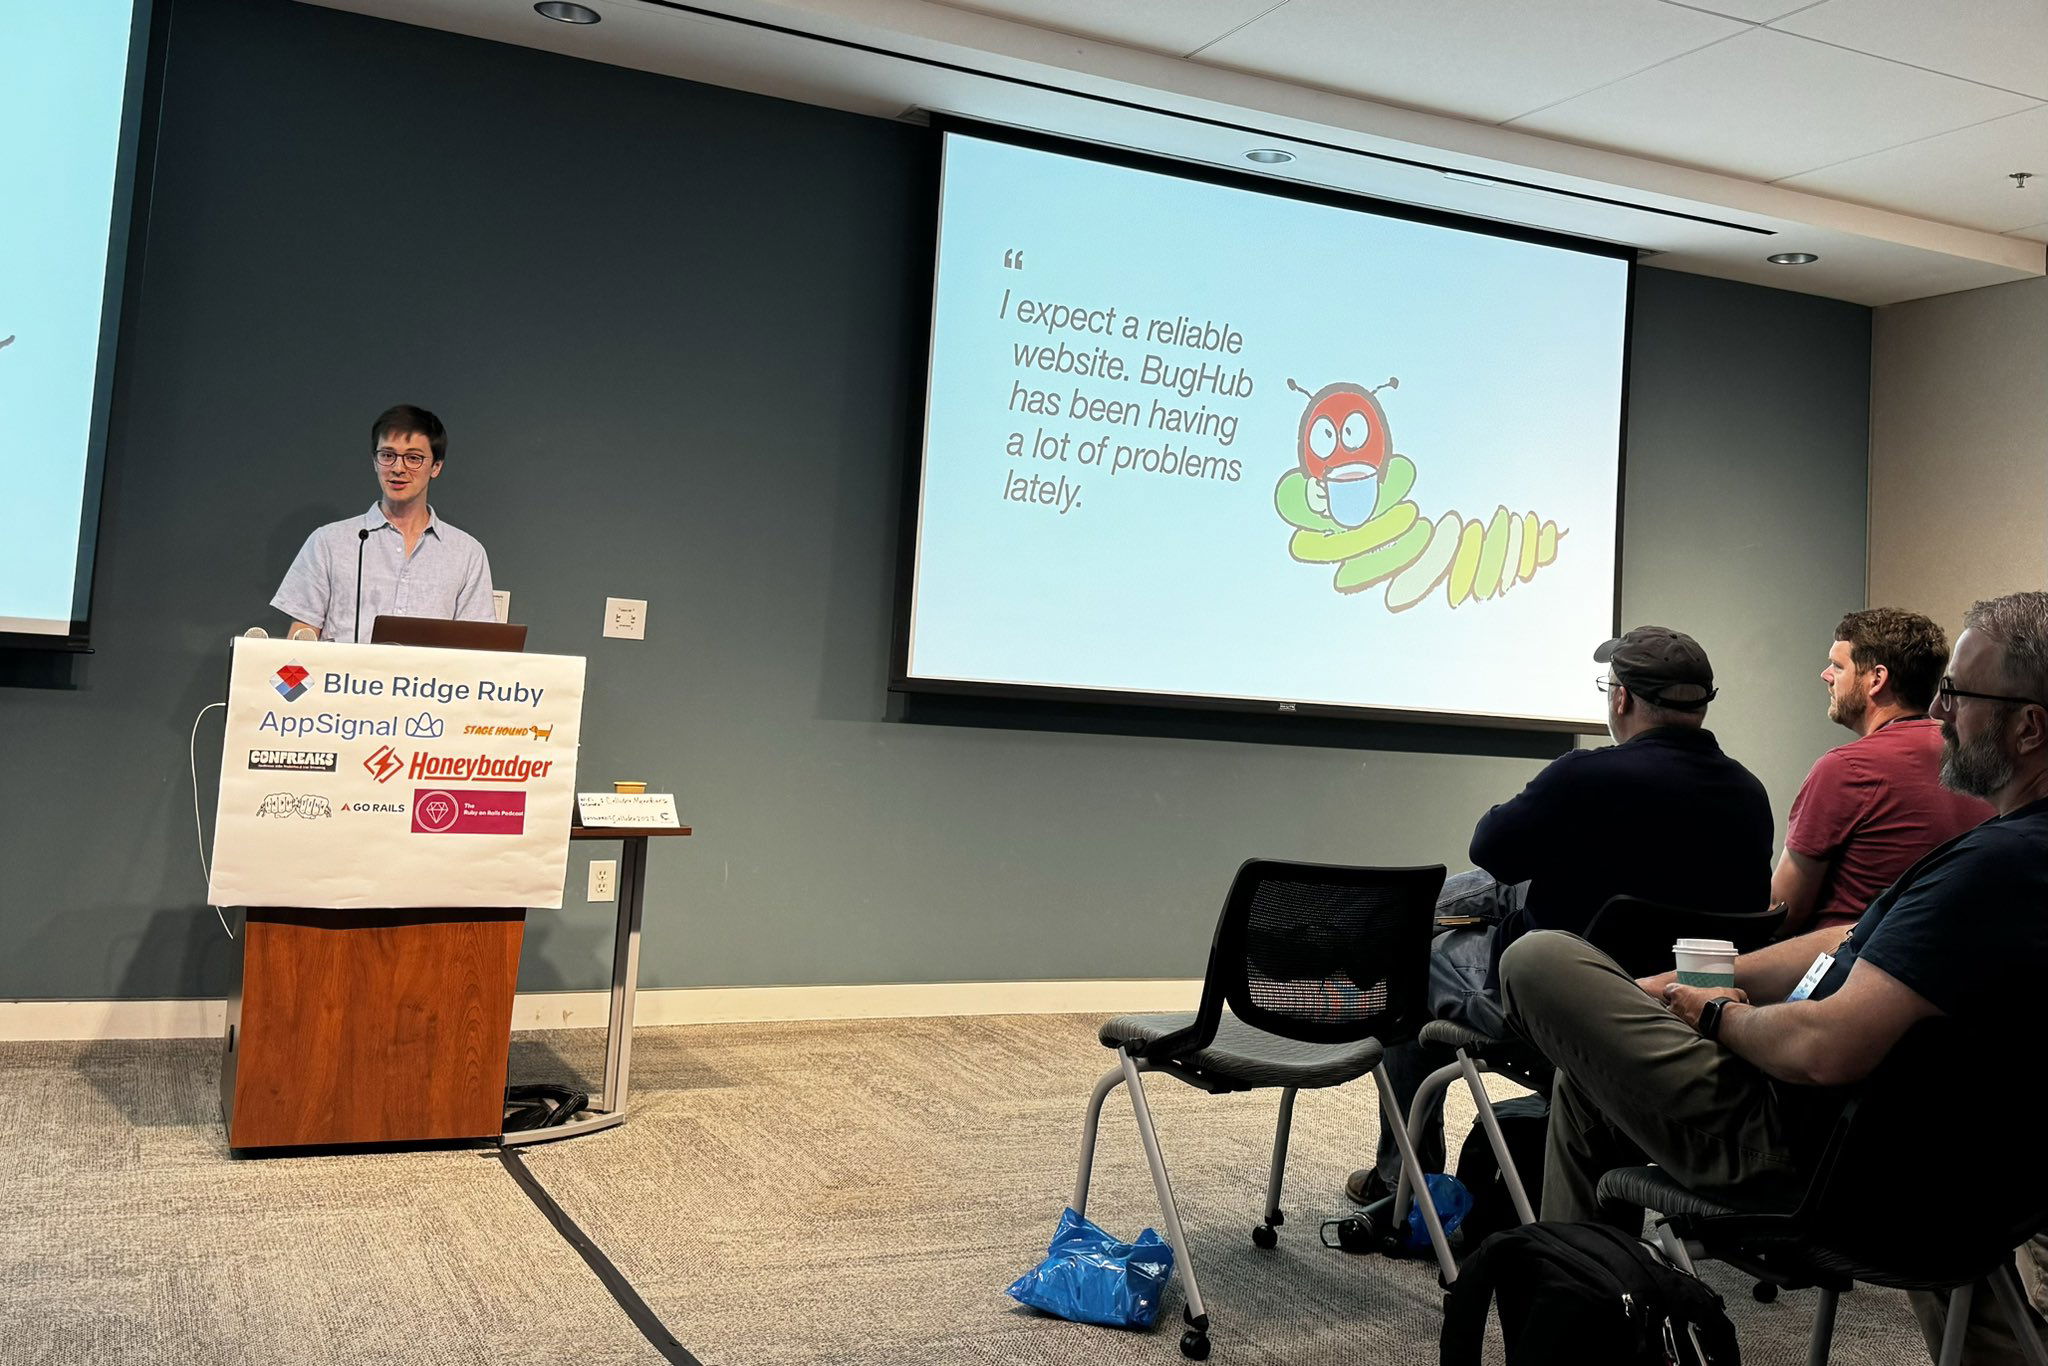 Speaker at a technology conference presenting a slide titled “I expect a reliable website. BugHub has been having a lot of problems lately.” with a cartoon bug image, in front of an audience of attentive attendees.